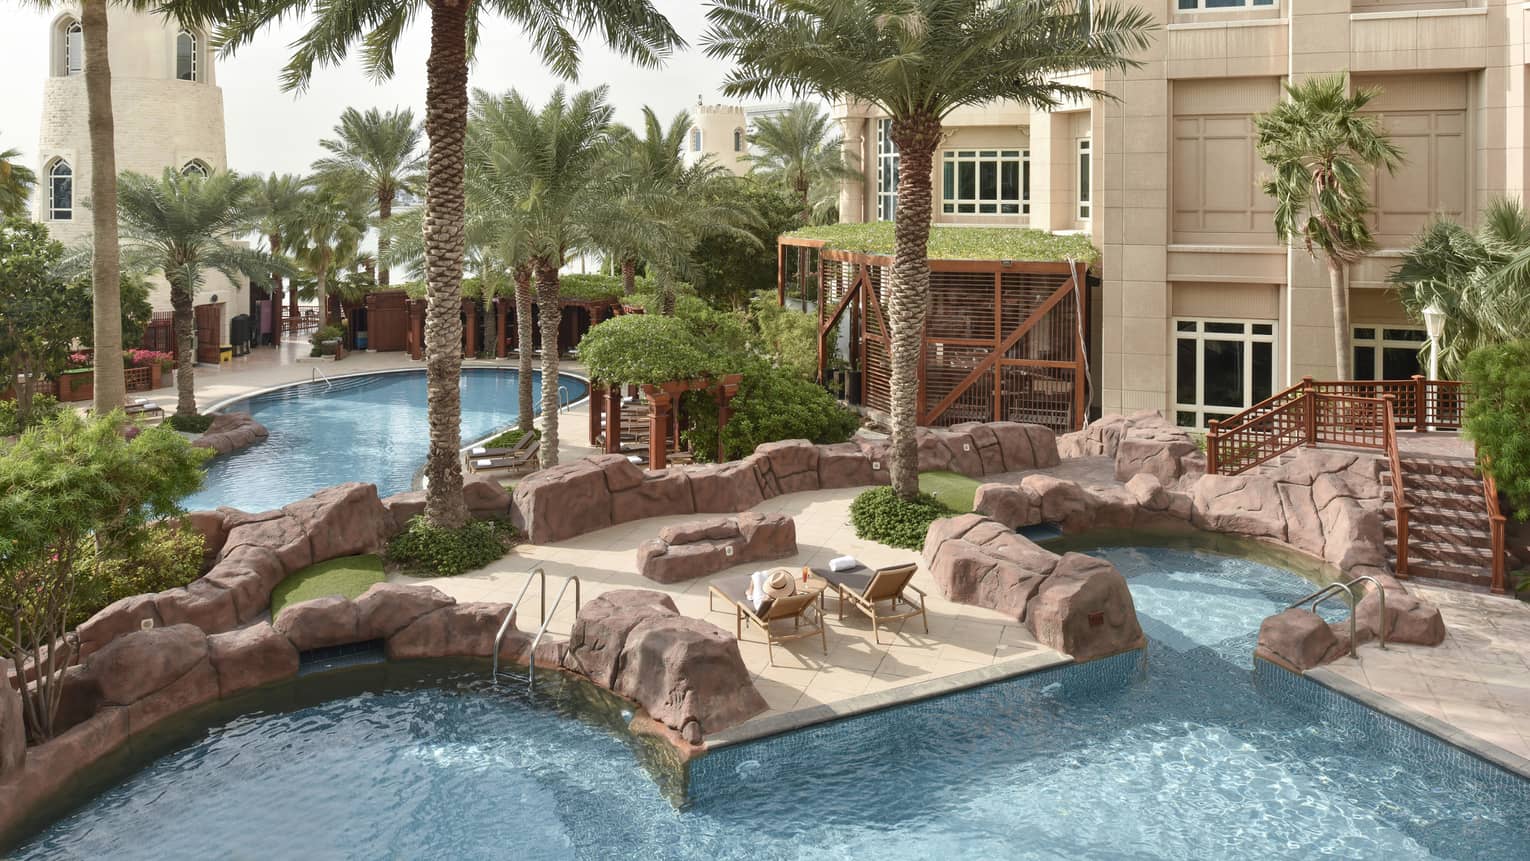 Four Seasons Hotel Doha outdoor swimming pools, palm trees